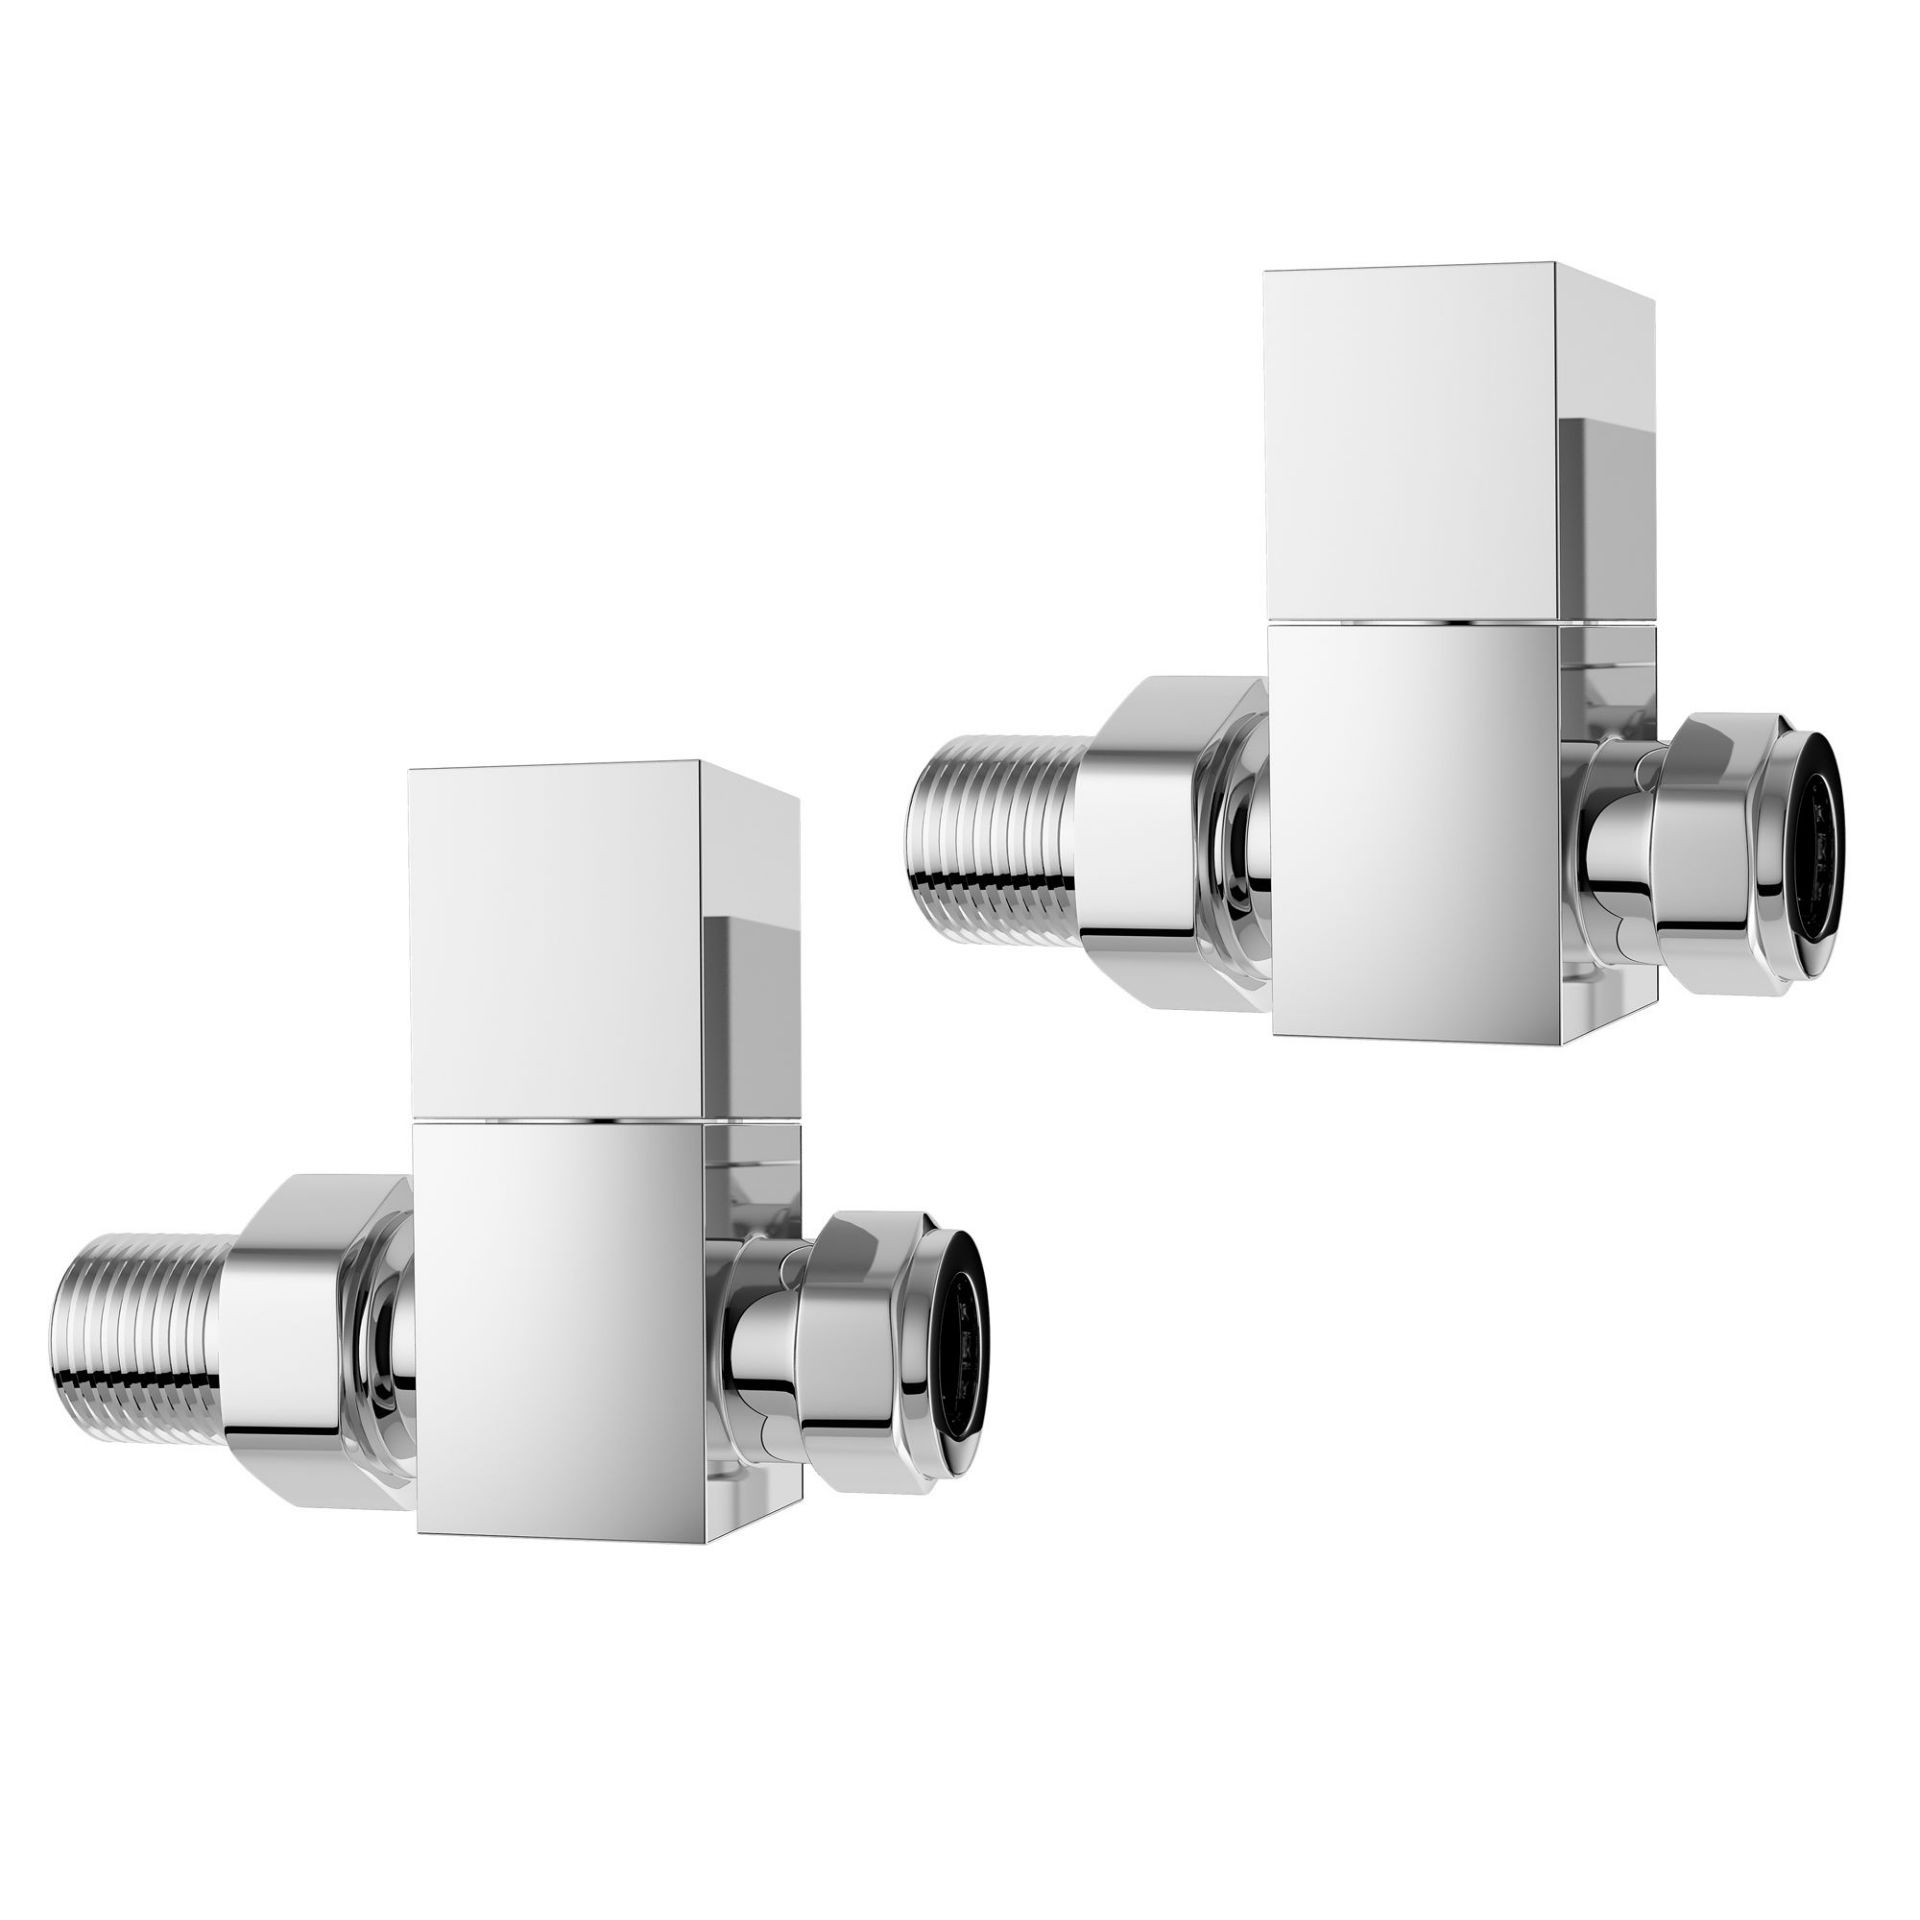 (PP1010) 15mm Standard Connection Square Straight Chrome Radiator Valves Solid brass construct... - Image 2 of 2